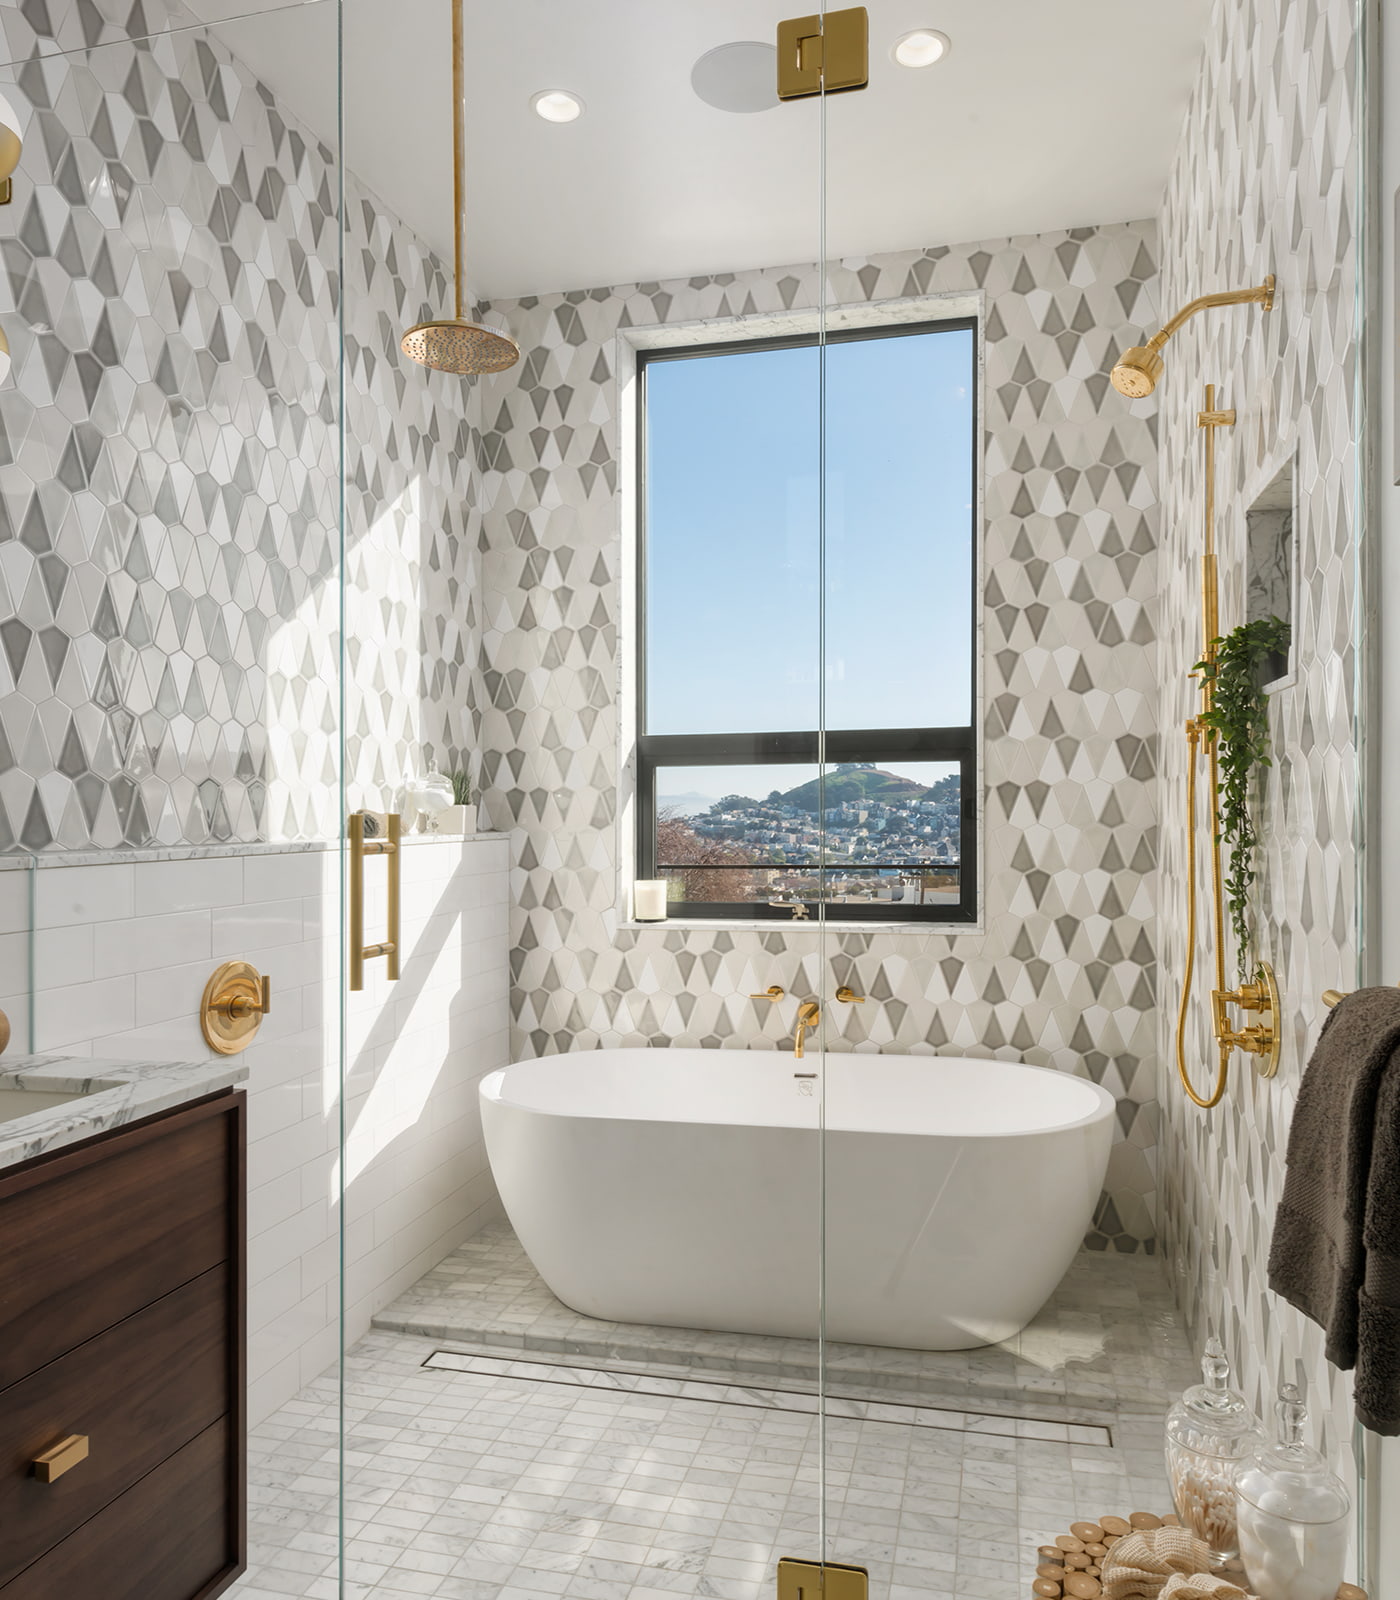 A white soaker tub in a modern bathroom with tri-colored tiles on the wall